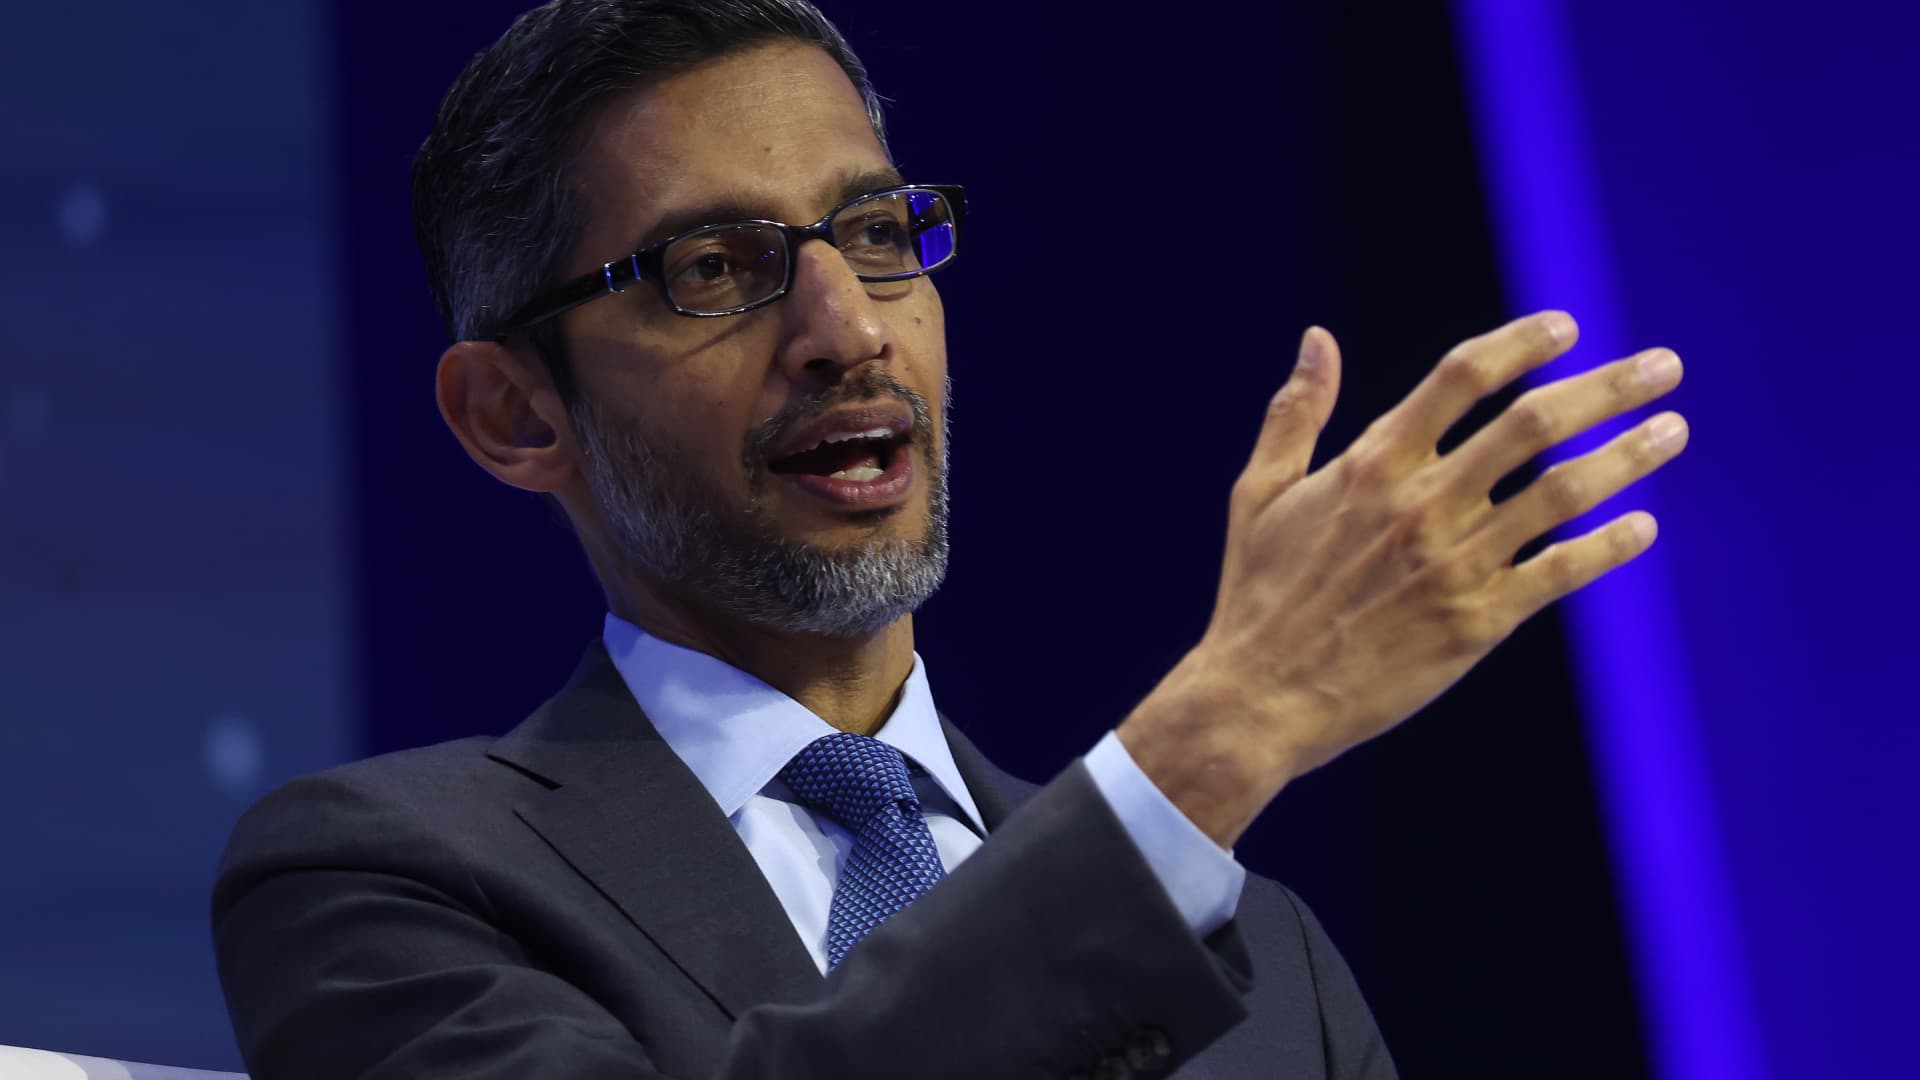 Alphabet tempers worries that its falling behind in AI in